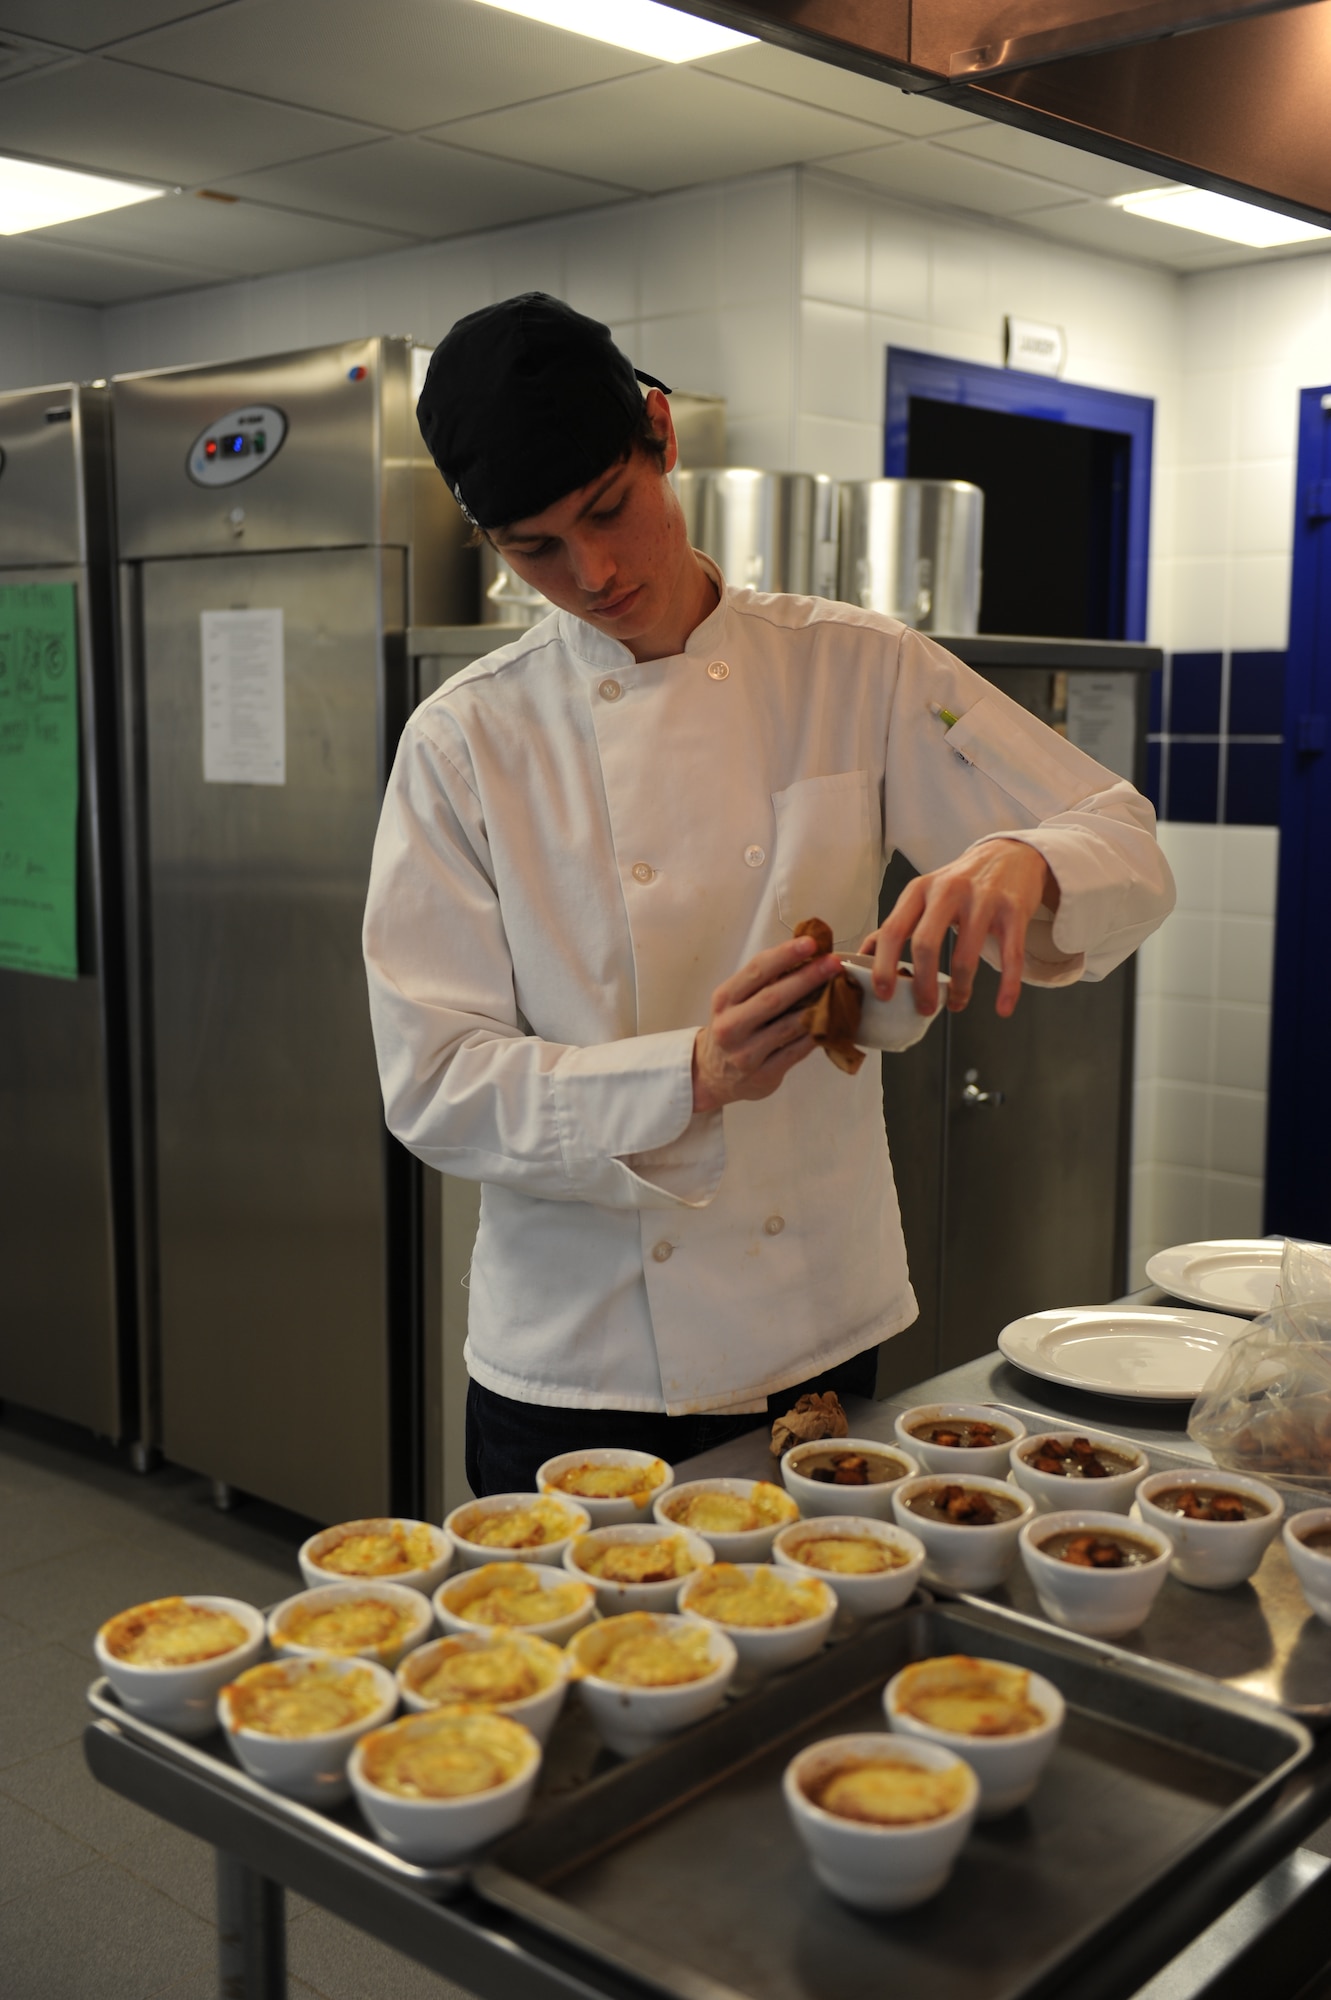 Jacen, a senior at Incirlik Unit school and Culinary Arts student, wipes a bowl of soup before serving during a lunch hosted by the Culinary Arts class for members of the 728th Air Mobility Squadron Feb. 6, 2015, at Incirlik Air Base, Turkey. The class often holds lunch for different units on base allowing the students to get a feel of how to interact with quests and to showcase what they have learned. (U.S. Air Force photos by Tech. Sgt. Taylor Worley)